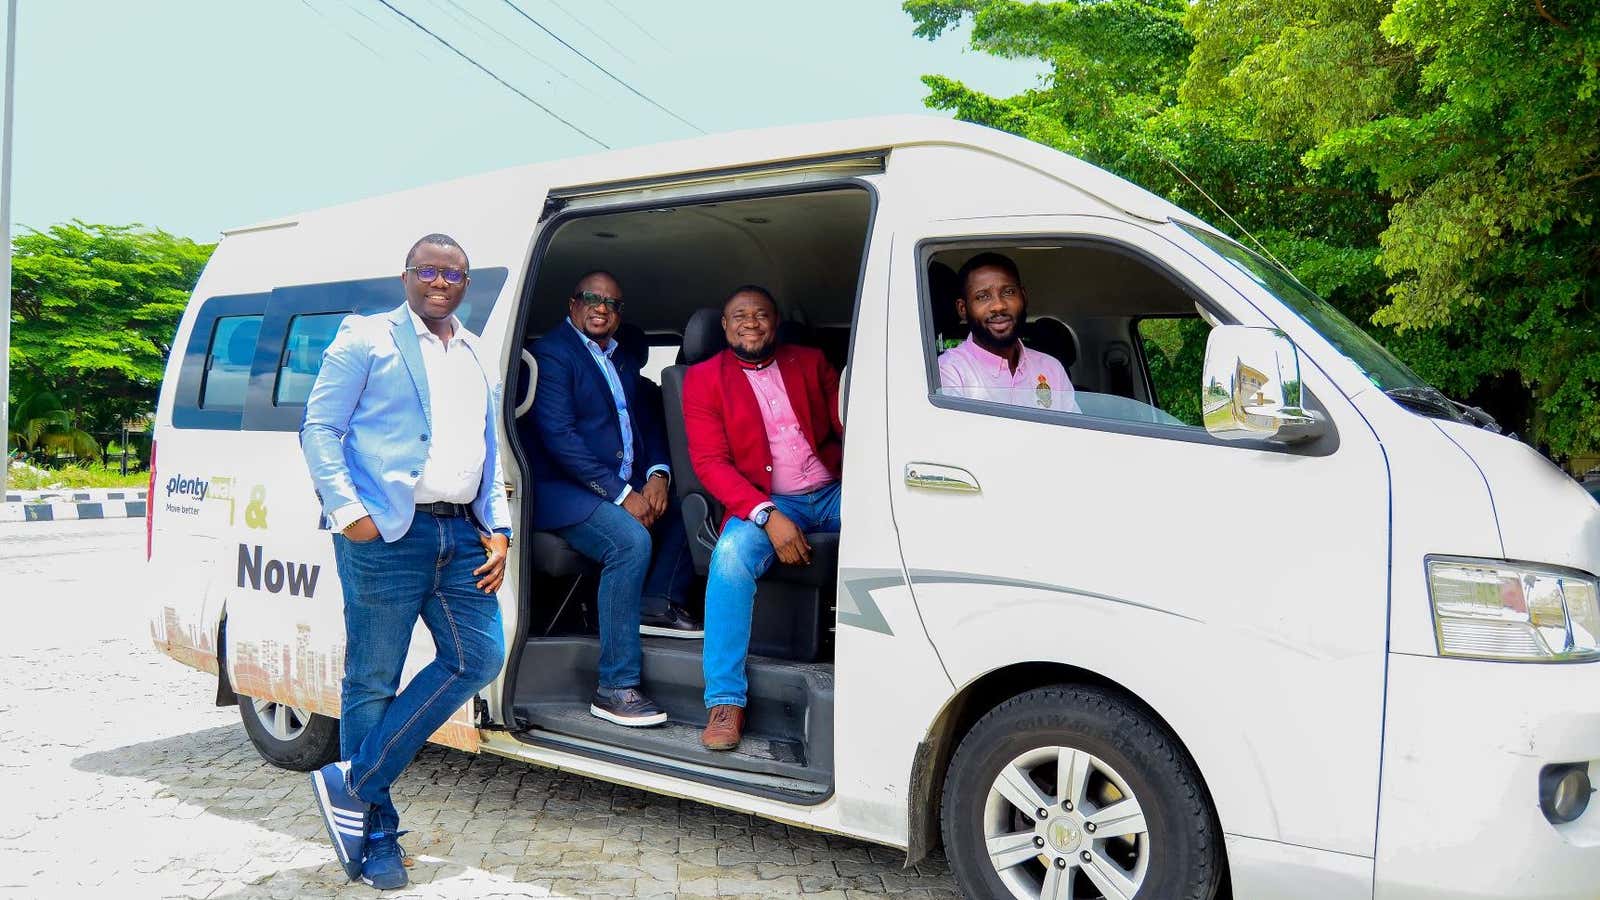 The founders of Nigeria’s bus-hailing startup Plentywaka are pictured.